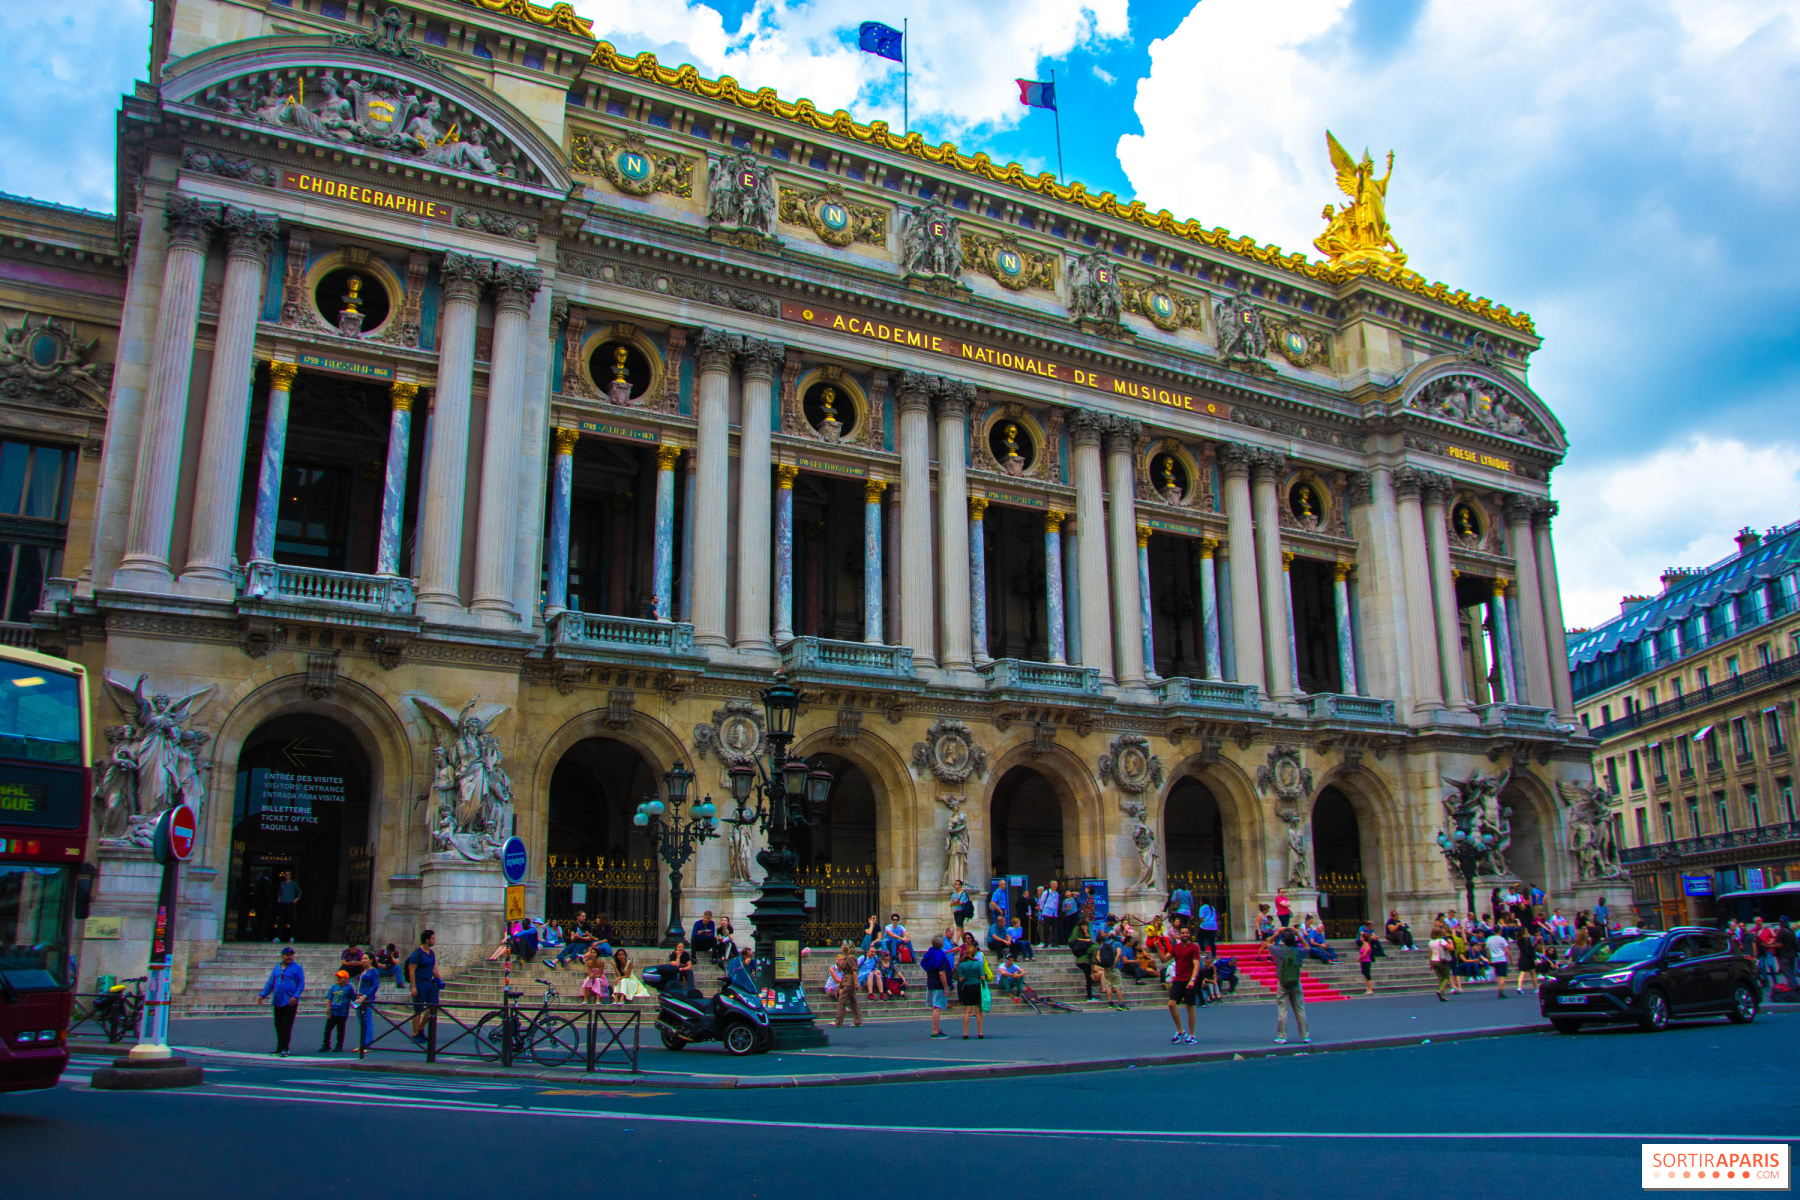 Paris Opera, Louis Vuitton Museum Show What's Happened to the City of Light